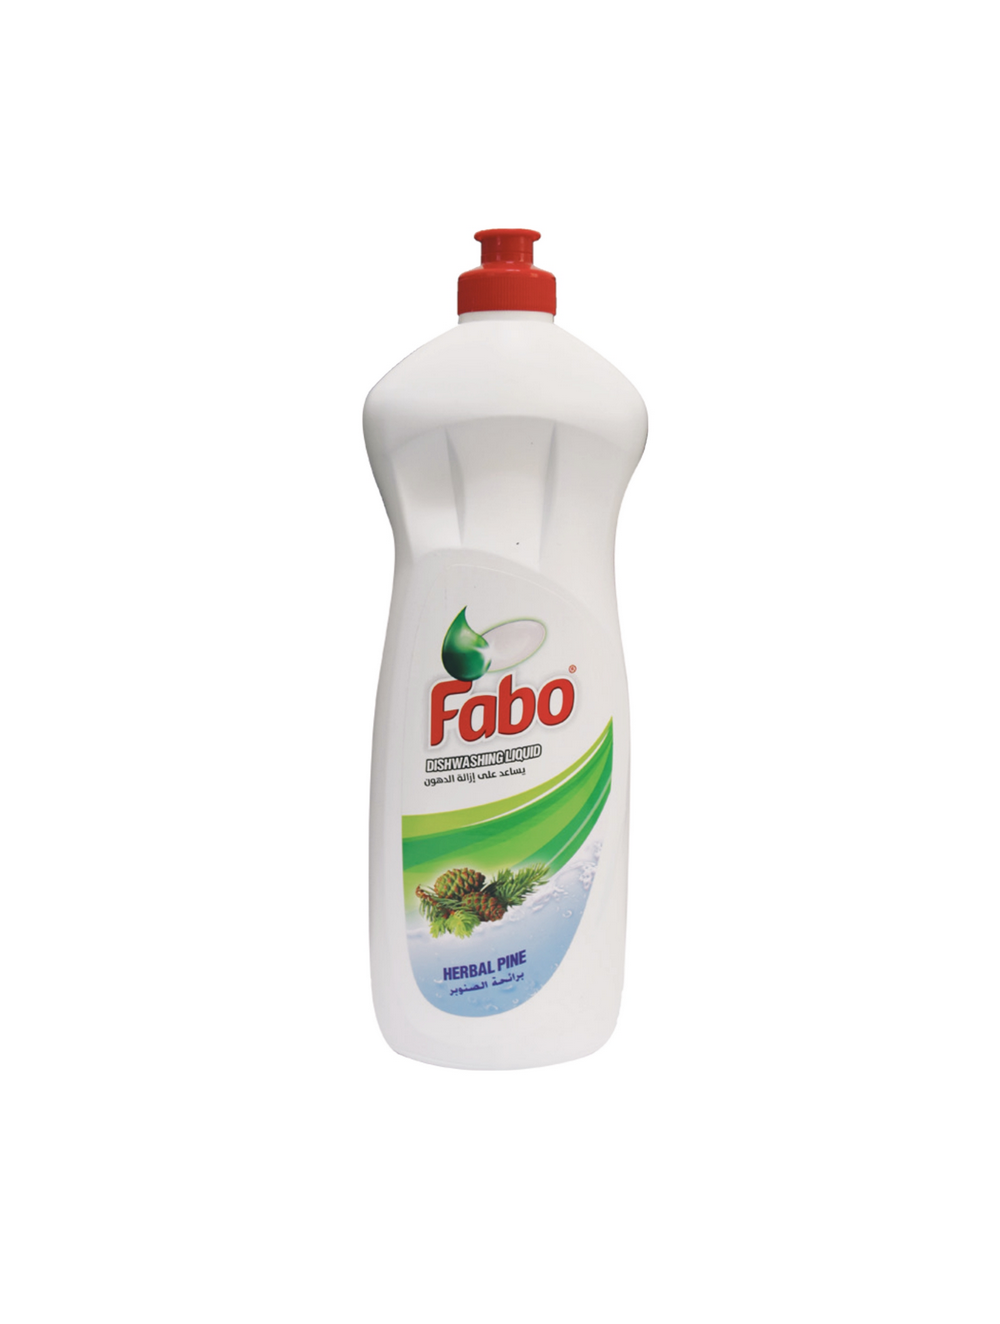 fabo-products_page-0021